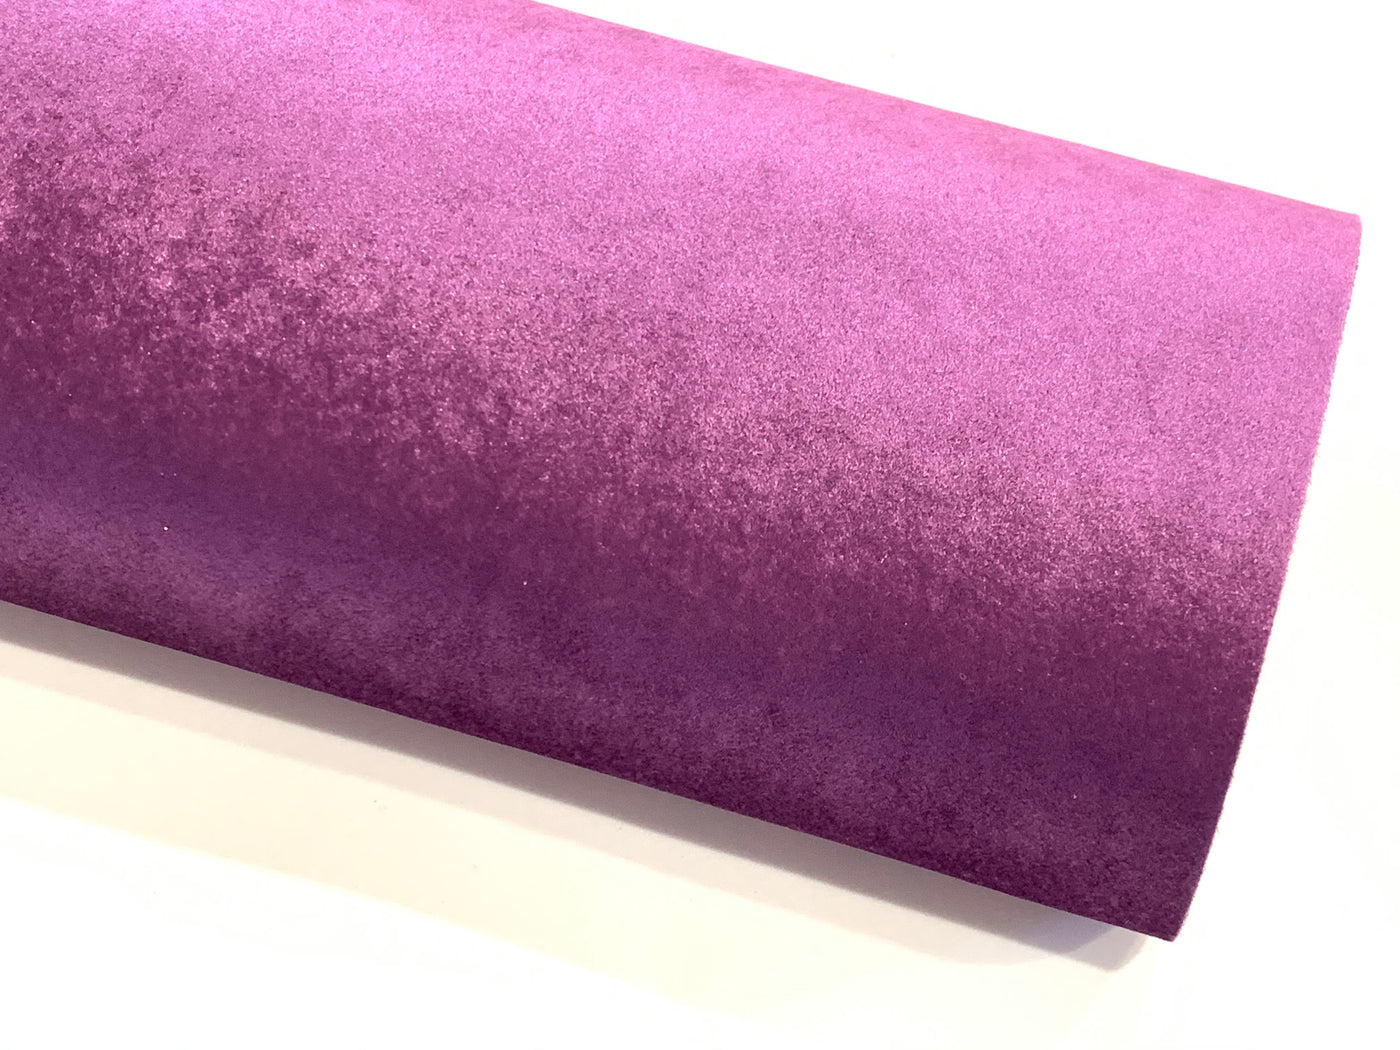 Eggplant Purple Velvet Fabric Sheet 0.9mm Sturdy for Bows - A4